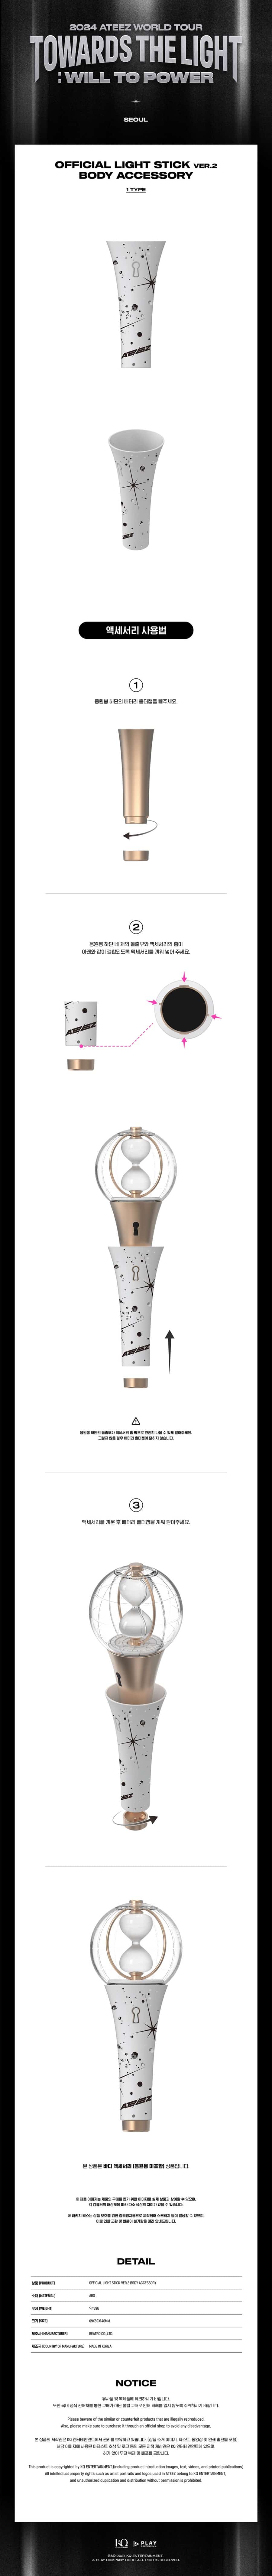 ateez-towards-the-light-will-to-power-light-stick-ver-2-body-accessory-wholesales